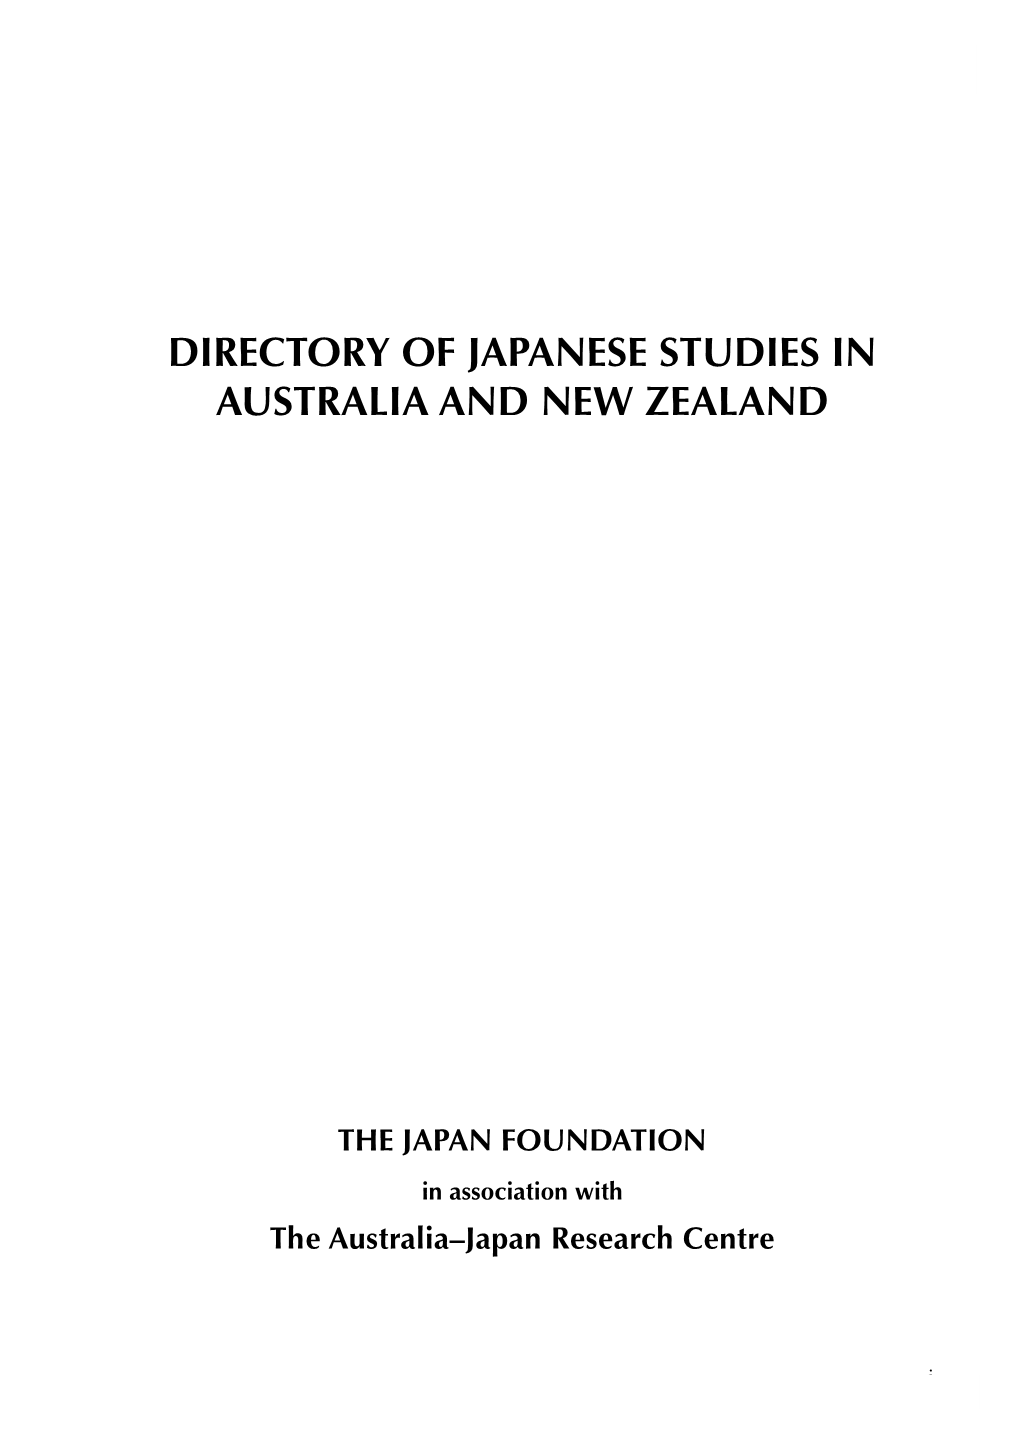 Directory of Japanese Studies in Australia and New Zealand